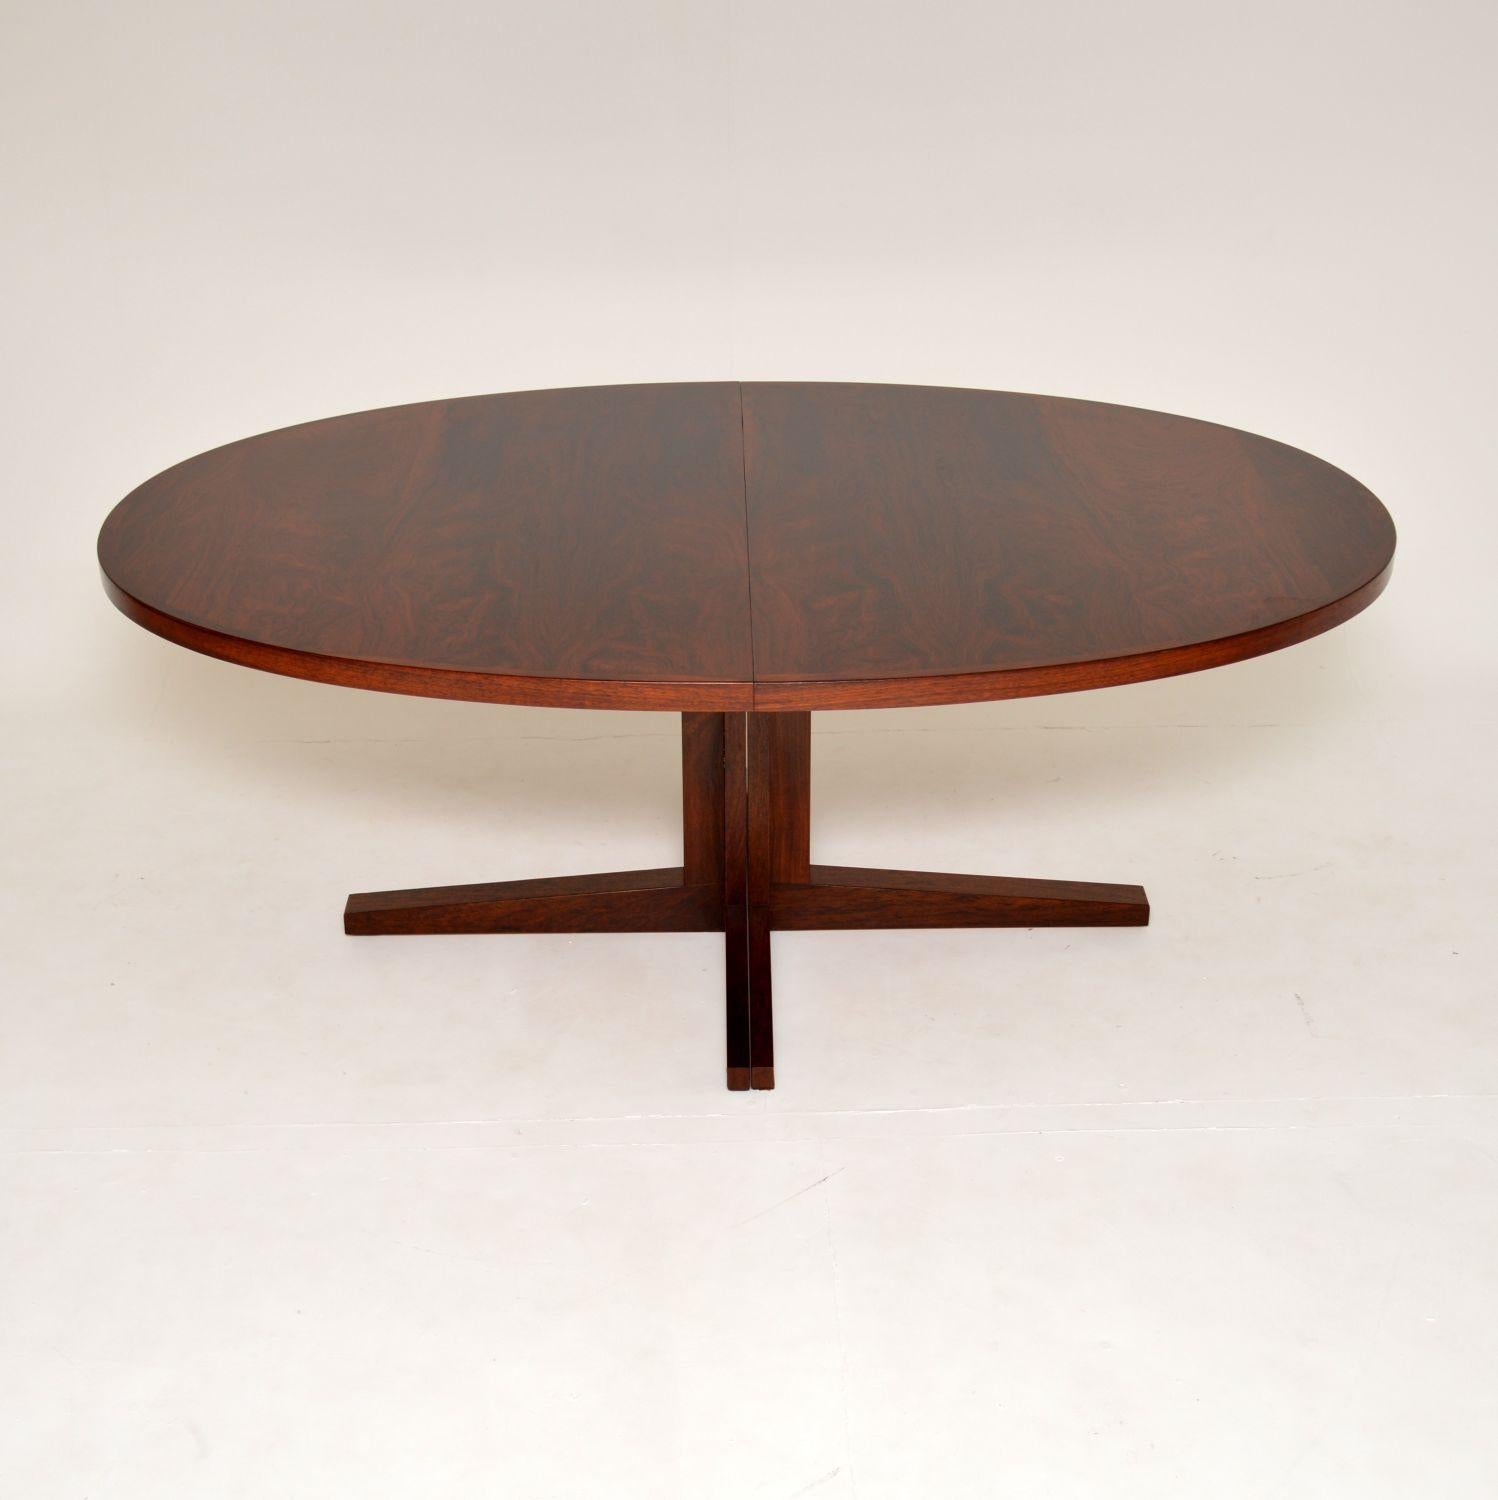 A very large, stylish and impressive vintage Danish oval dining table, beautifully made from wood. This was designed by John Mortensen, it was made by Heltborg Mobler in Denmark around the 1960’s.

The quality is absolutely outstanding, and it has